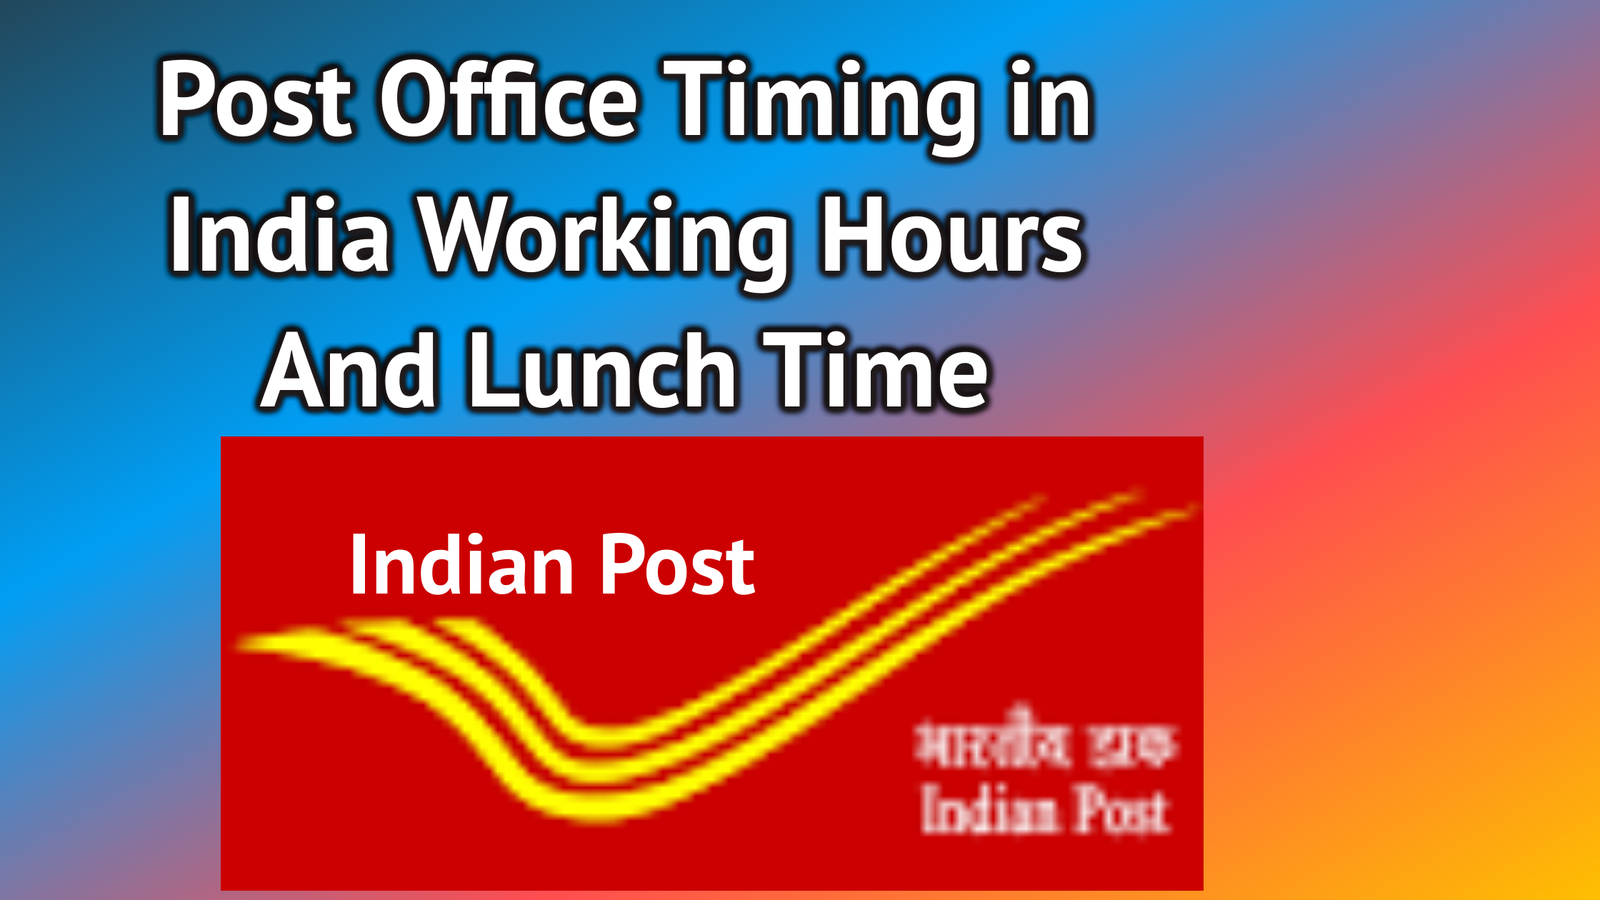 Post Office Timing in India Working Hours And Lunch Time